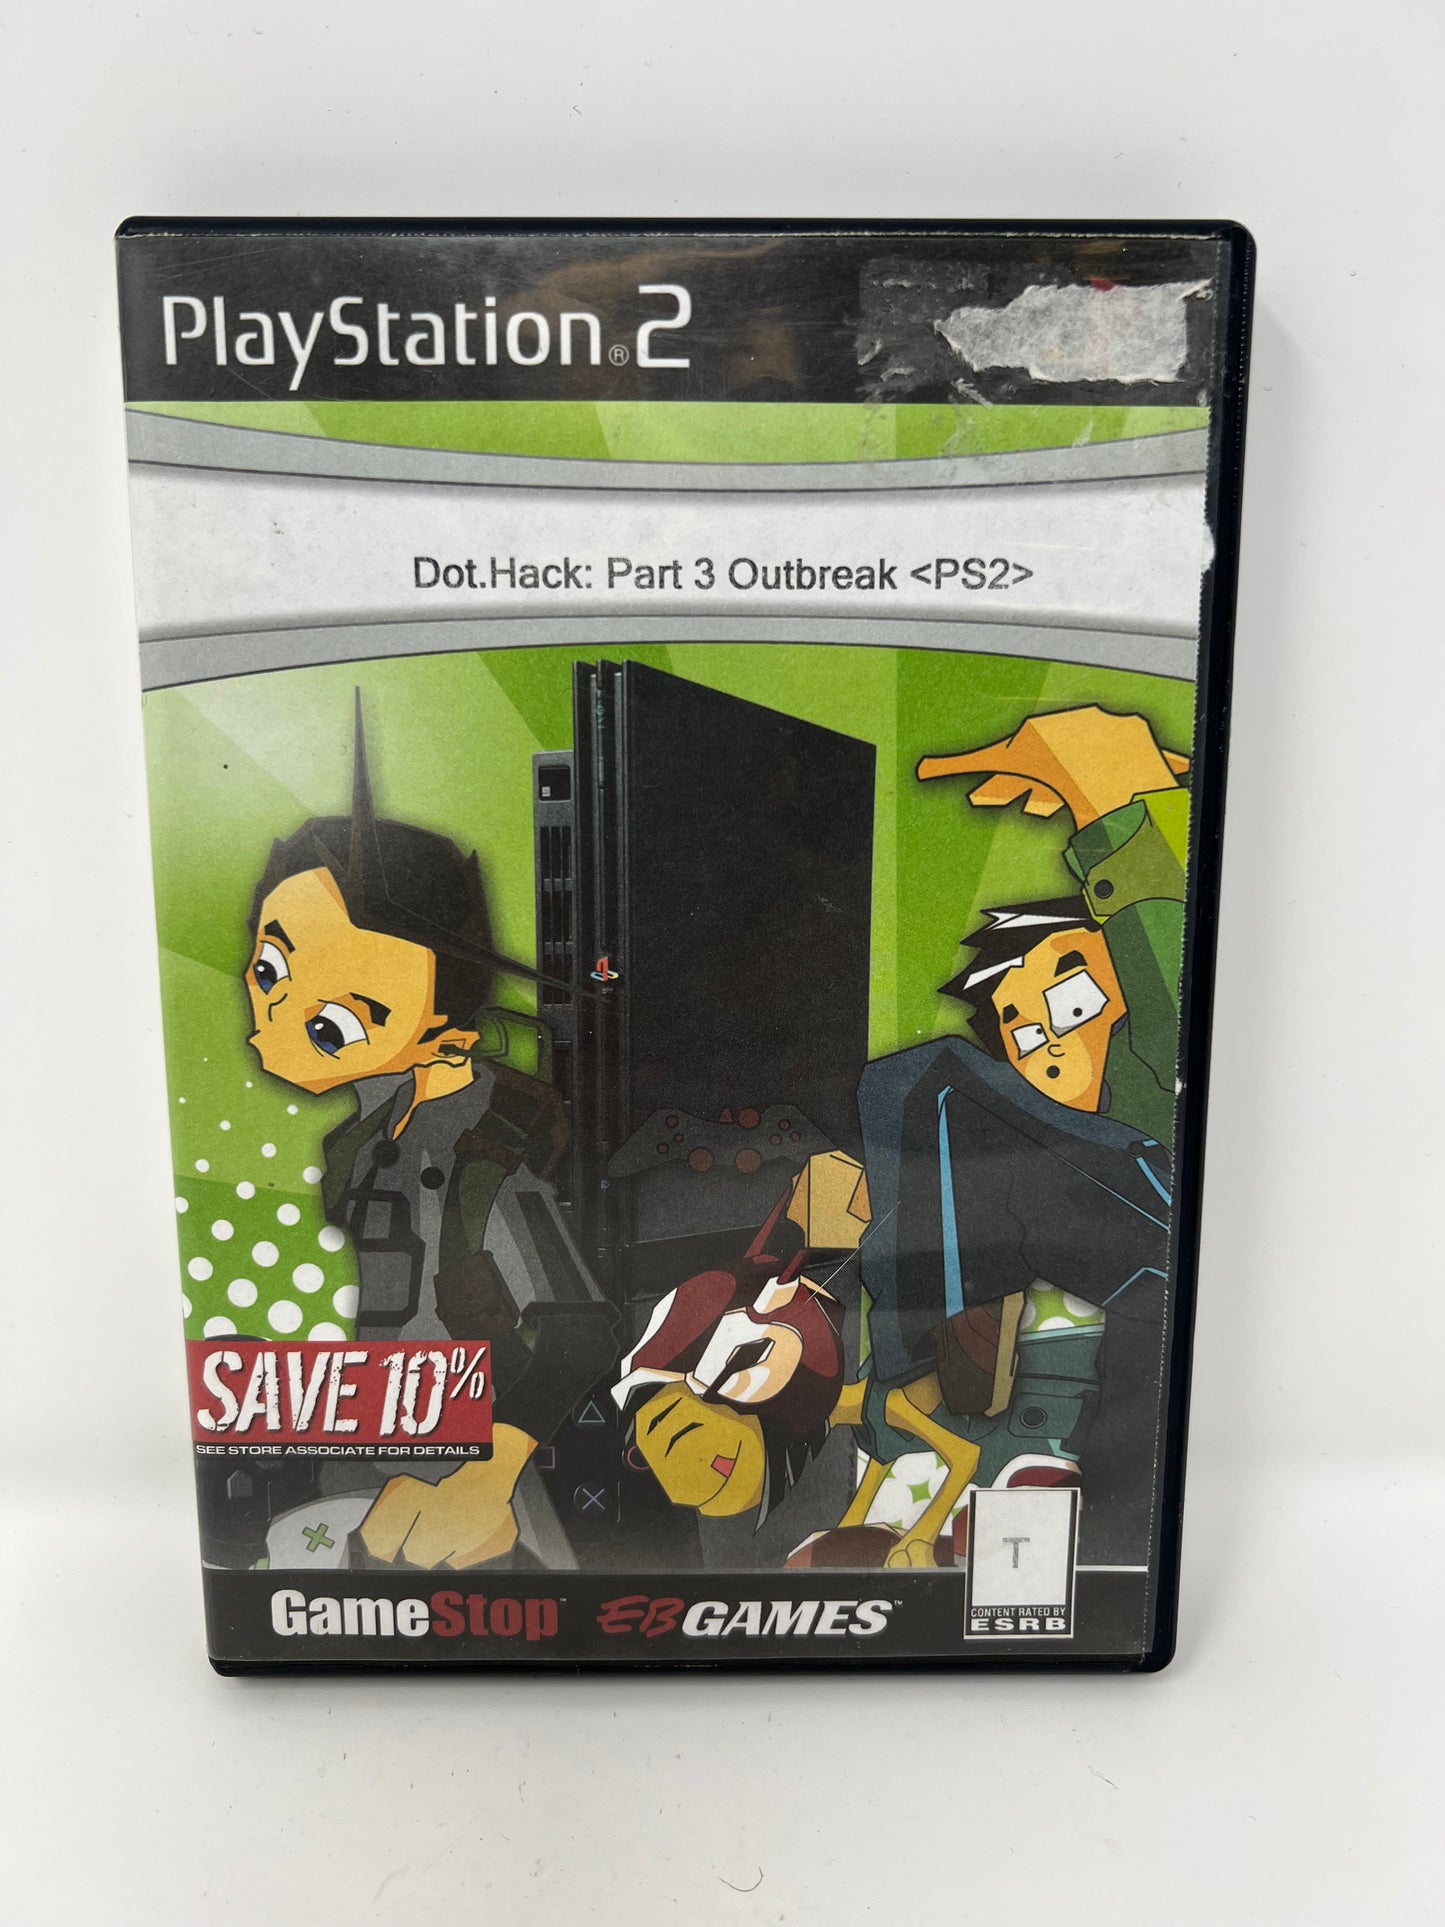 Dot.Hack: Part 3 Outbreak - PS2 Game - Used